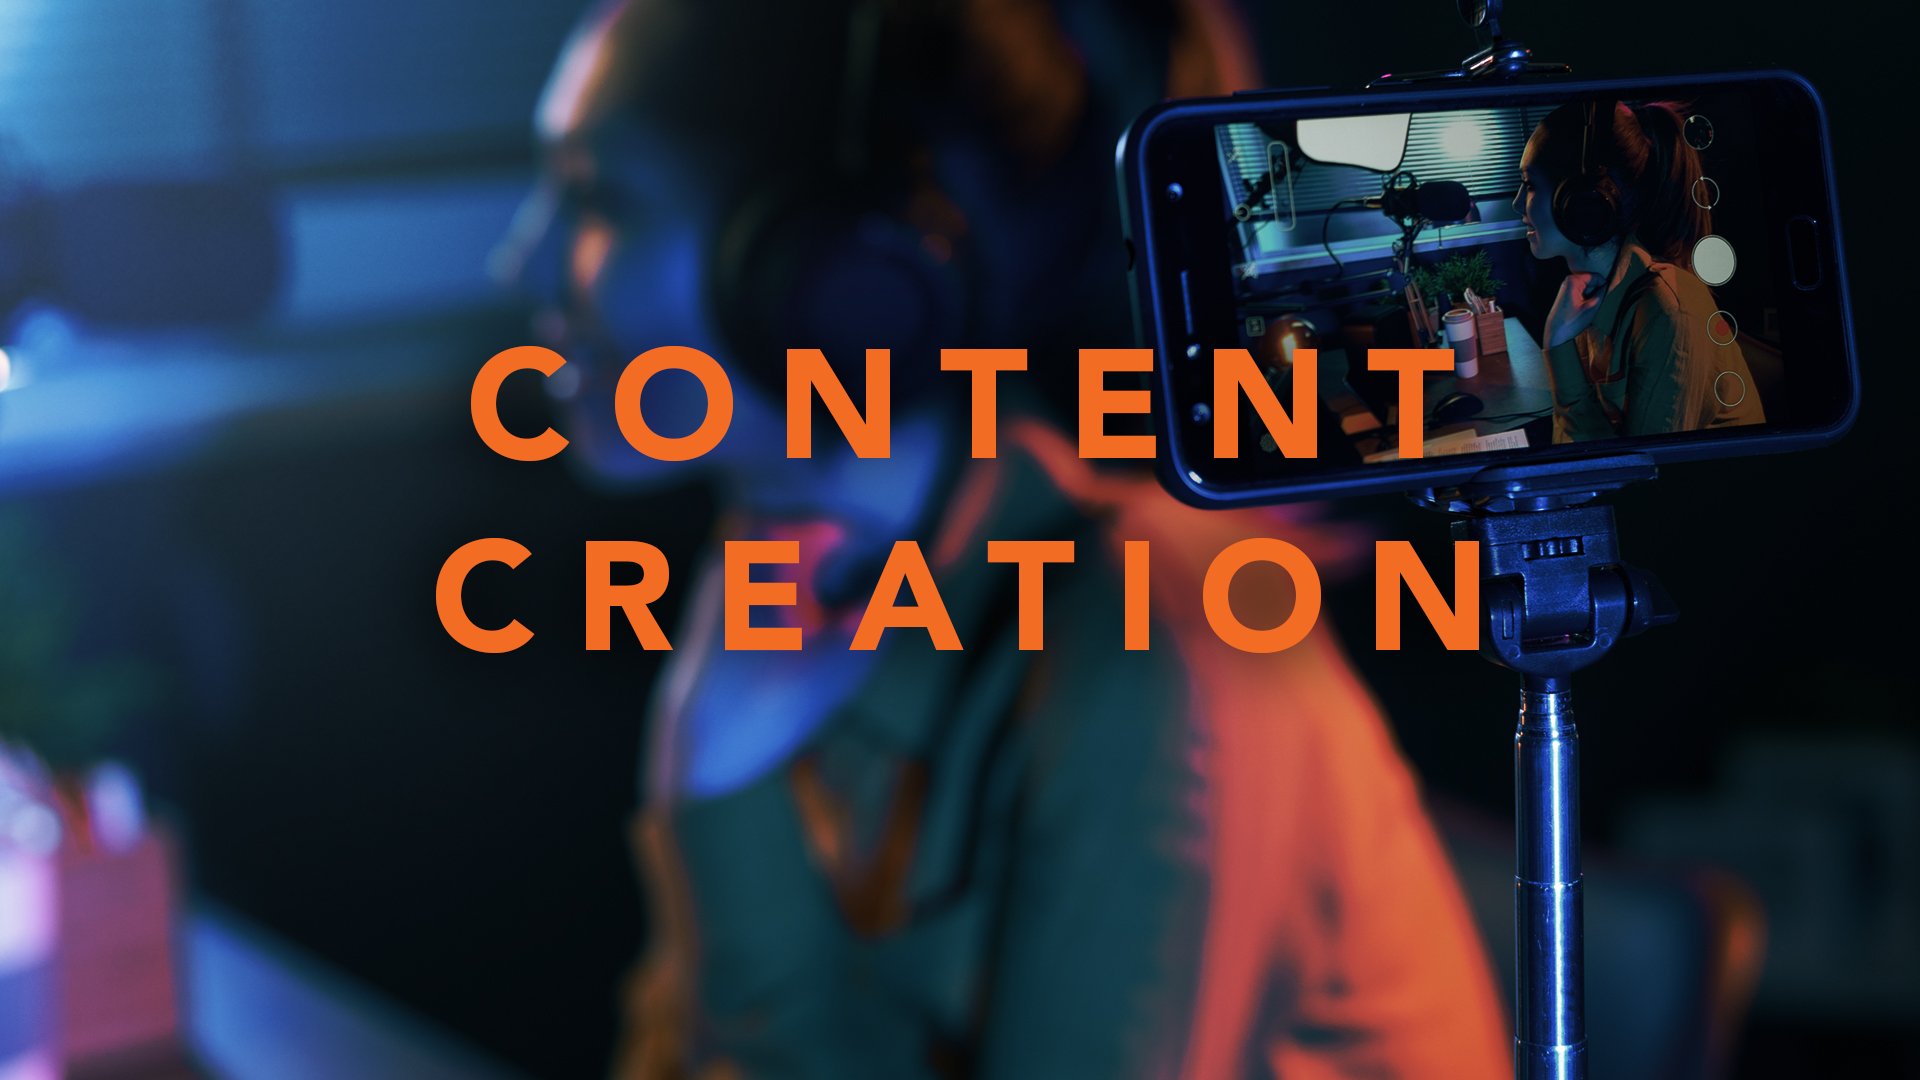 Content Creation <p>The use of social media is an elemental part of today's networked world. With our help, you can create content as short videos, pictures, or similar forms.</p>